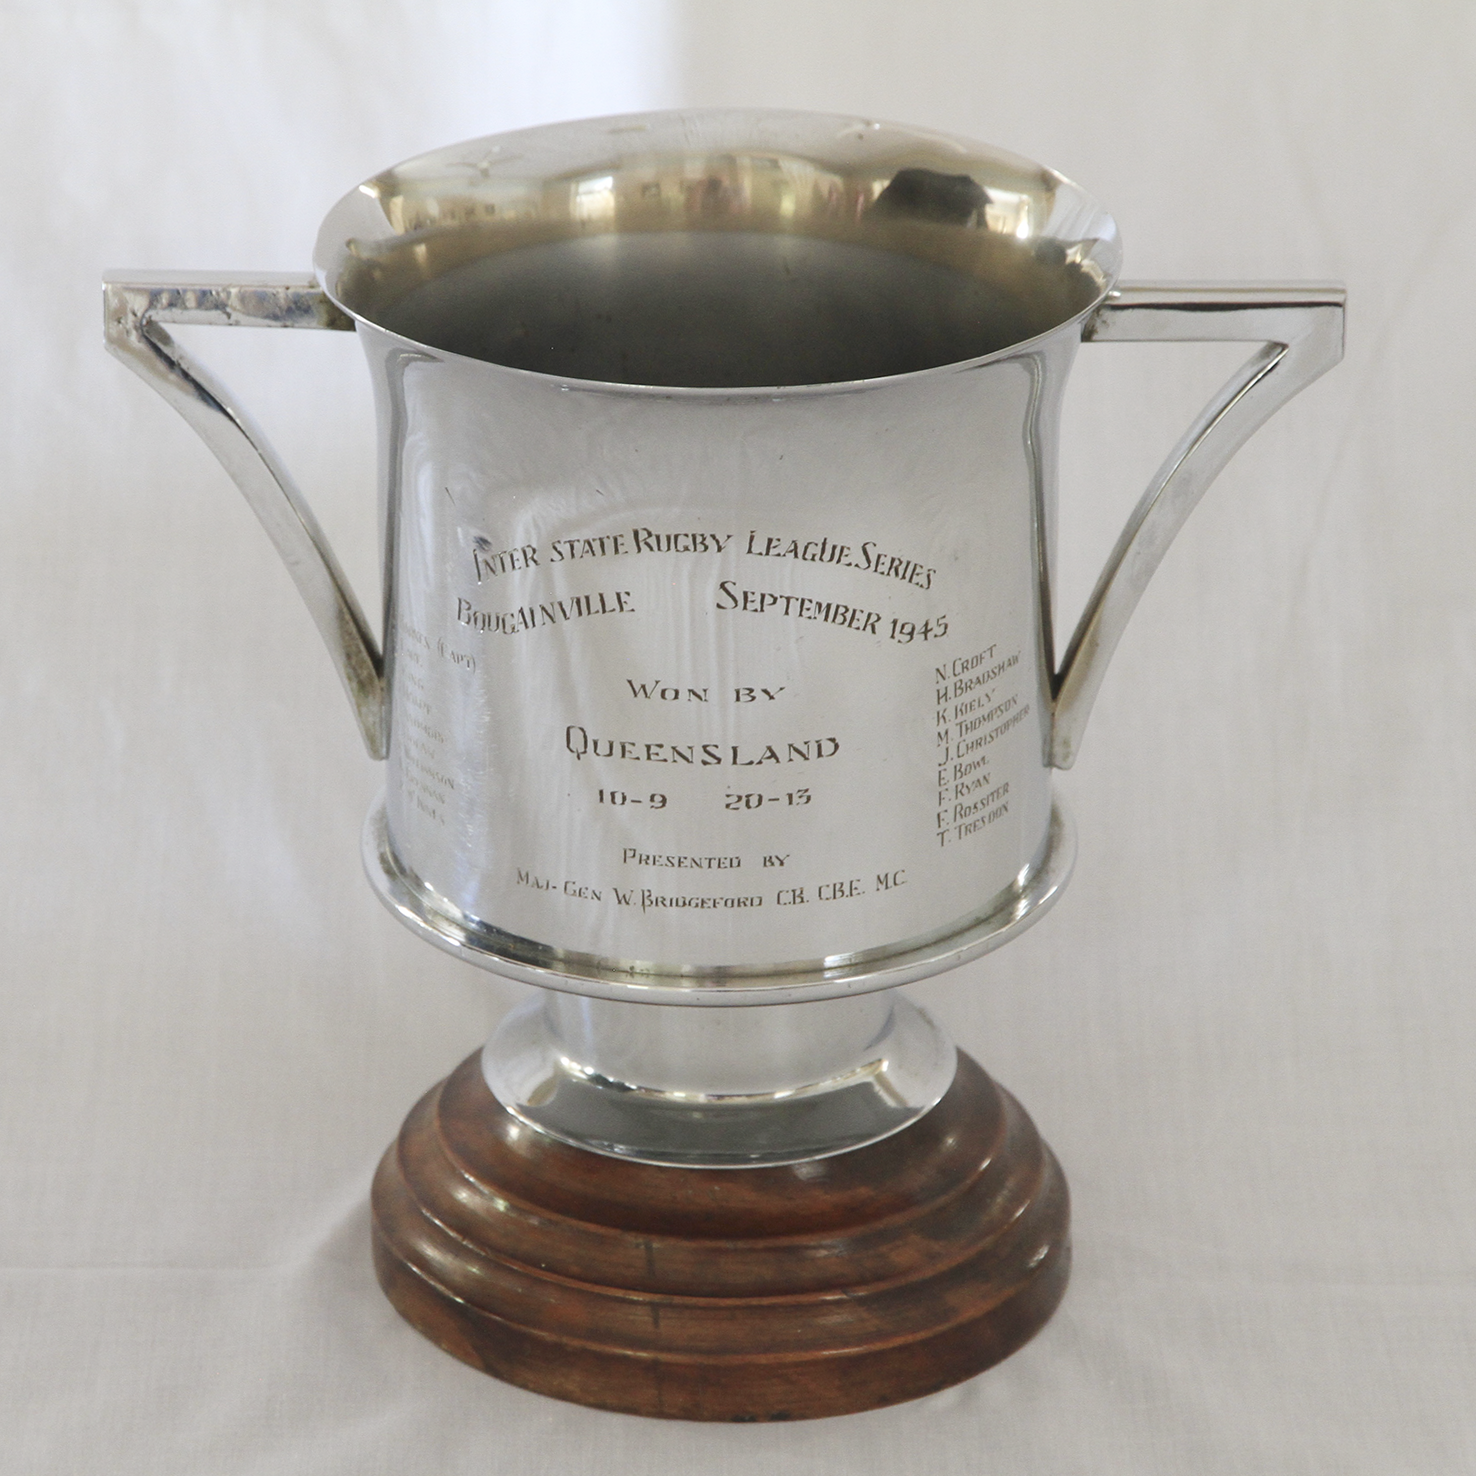 State of Origin Cup, 1945. Courtesy of Army Museum South Queensland.